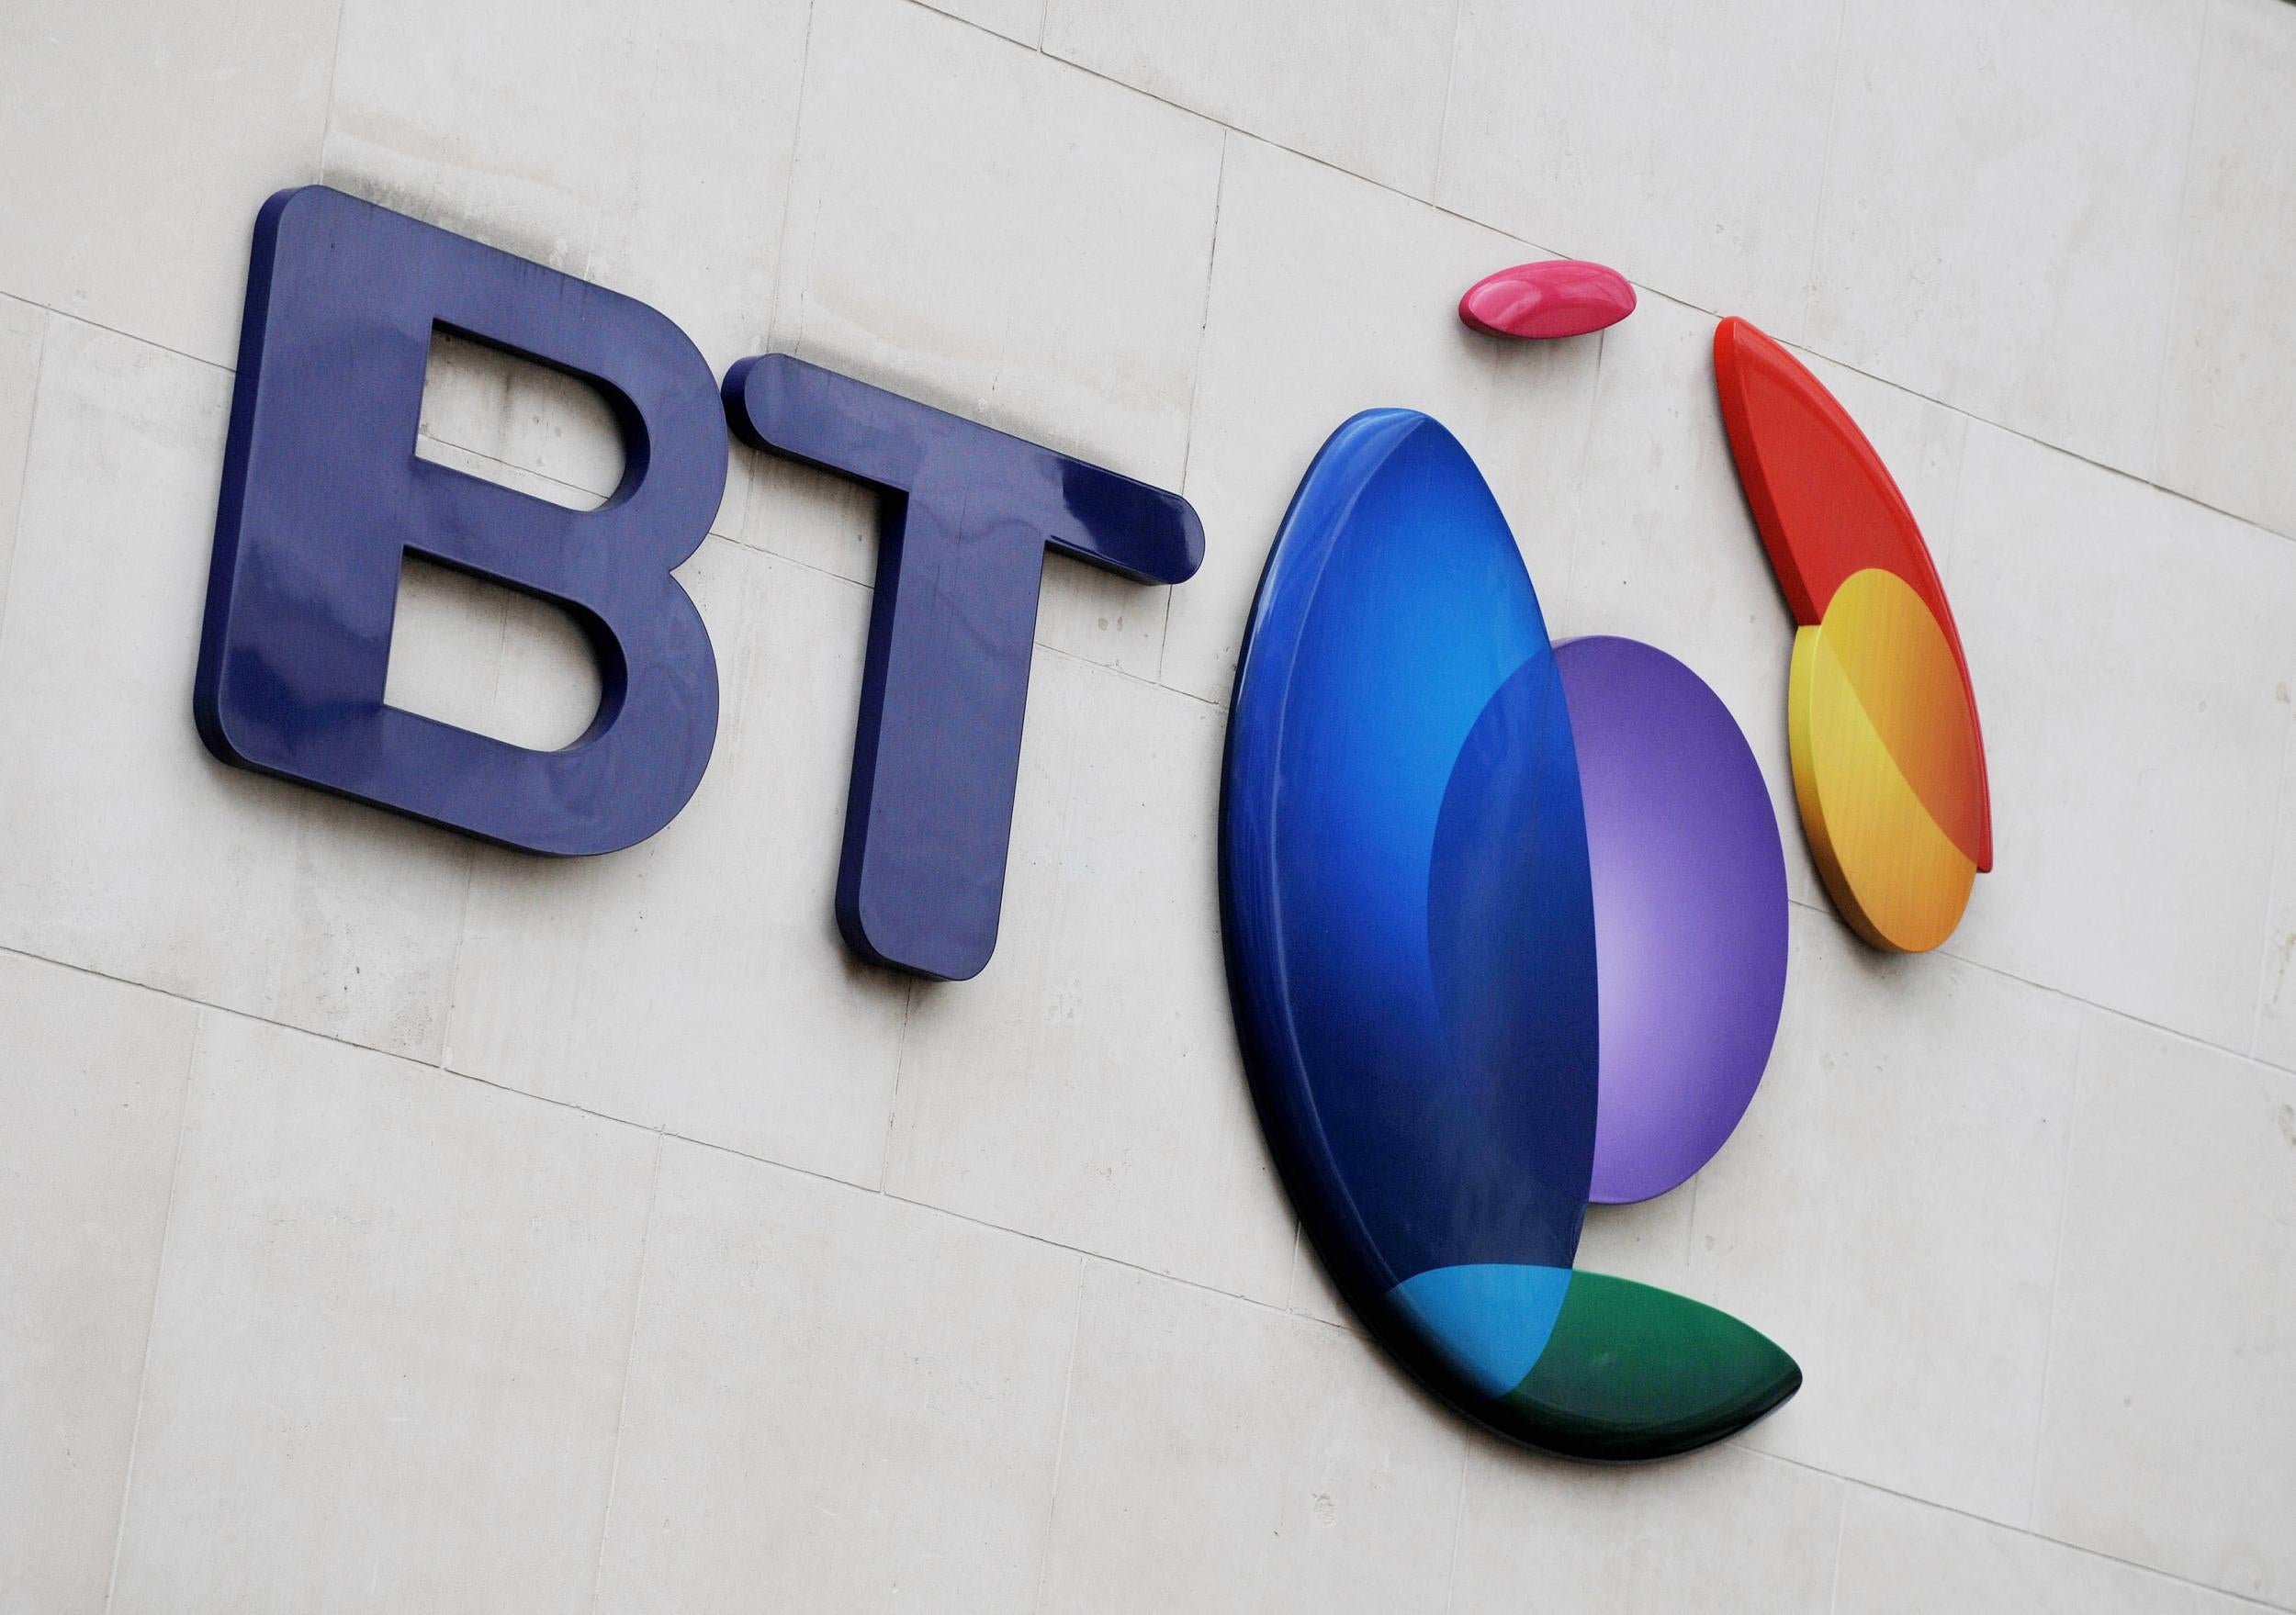 BT's EE mobile business helped offset some of the global services troubles